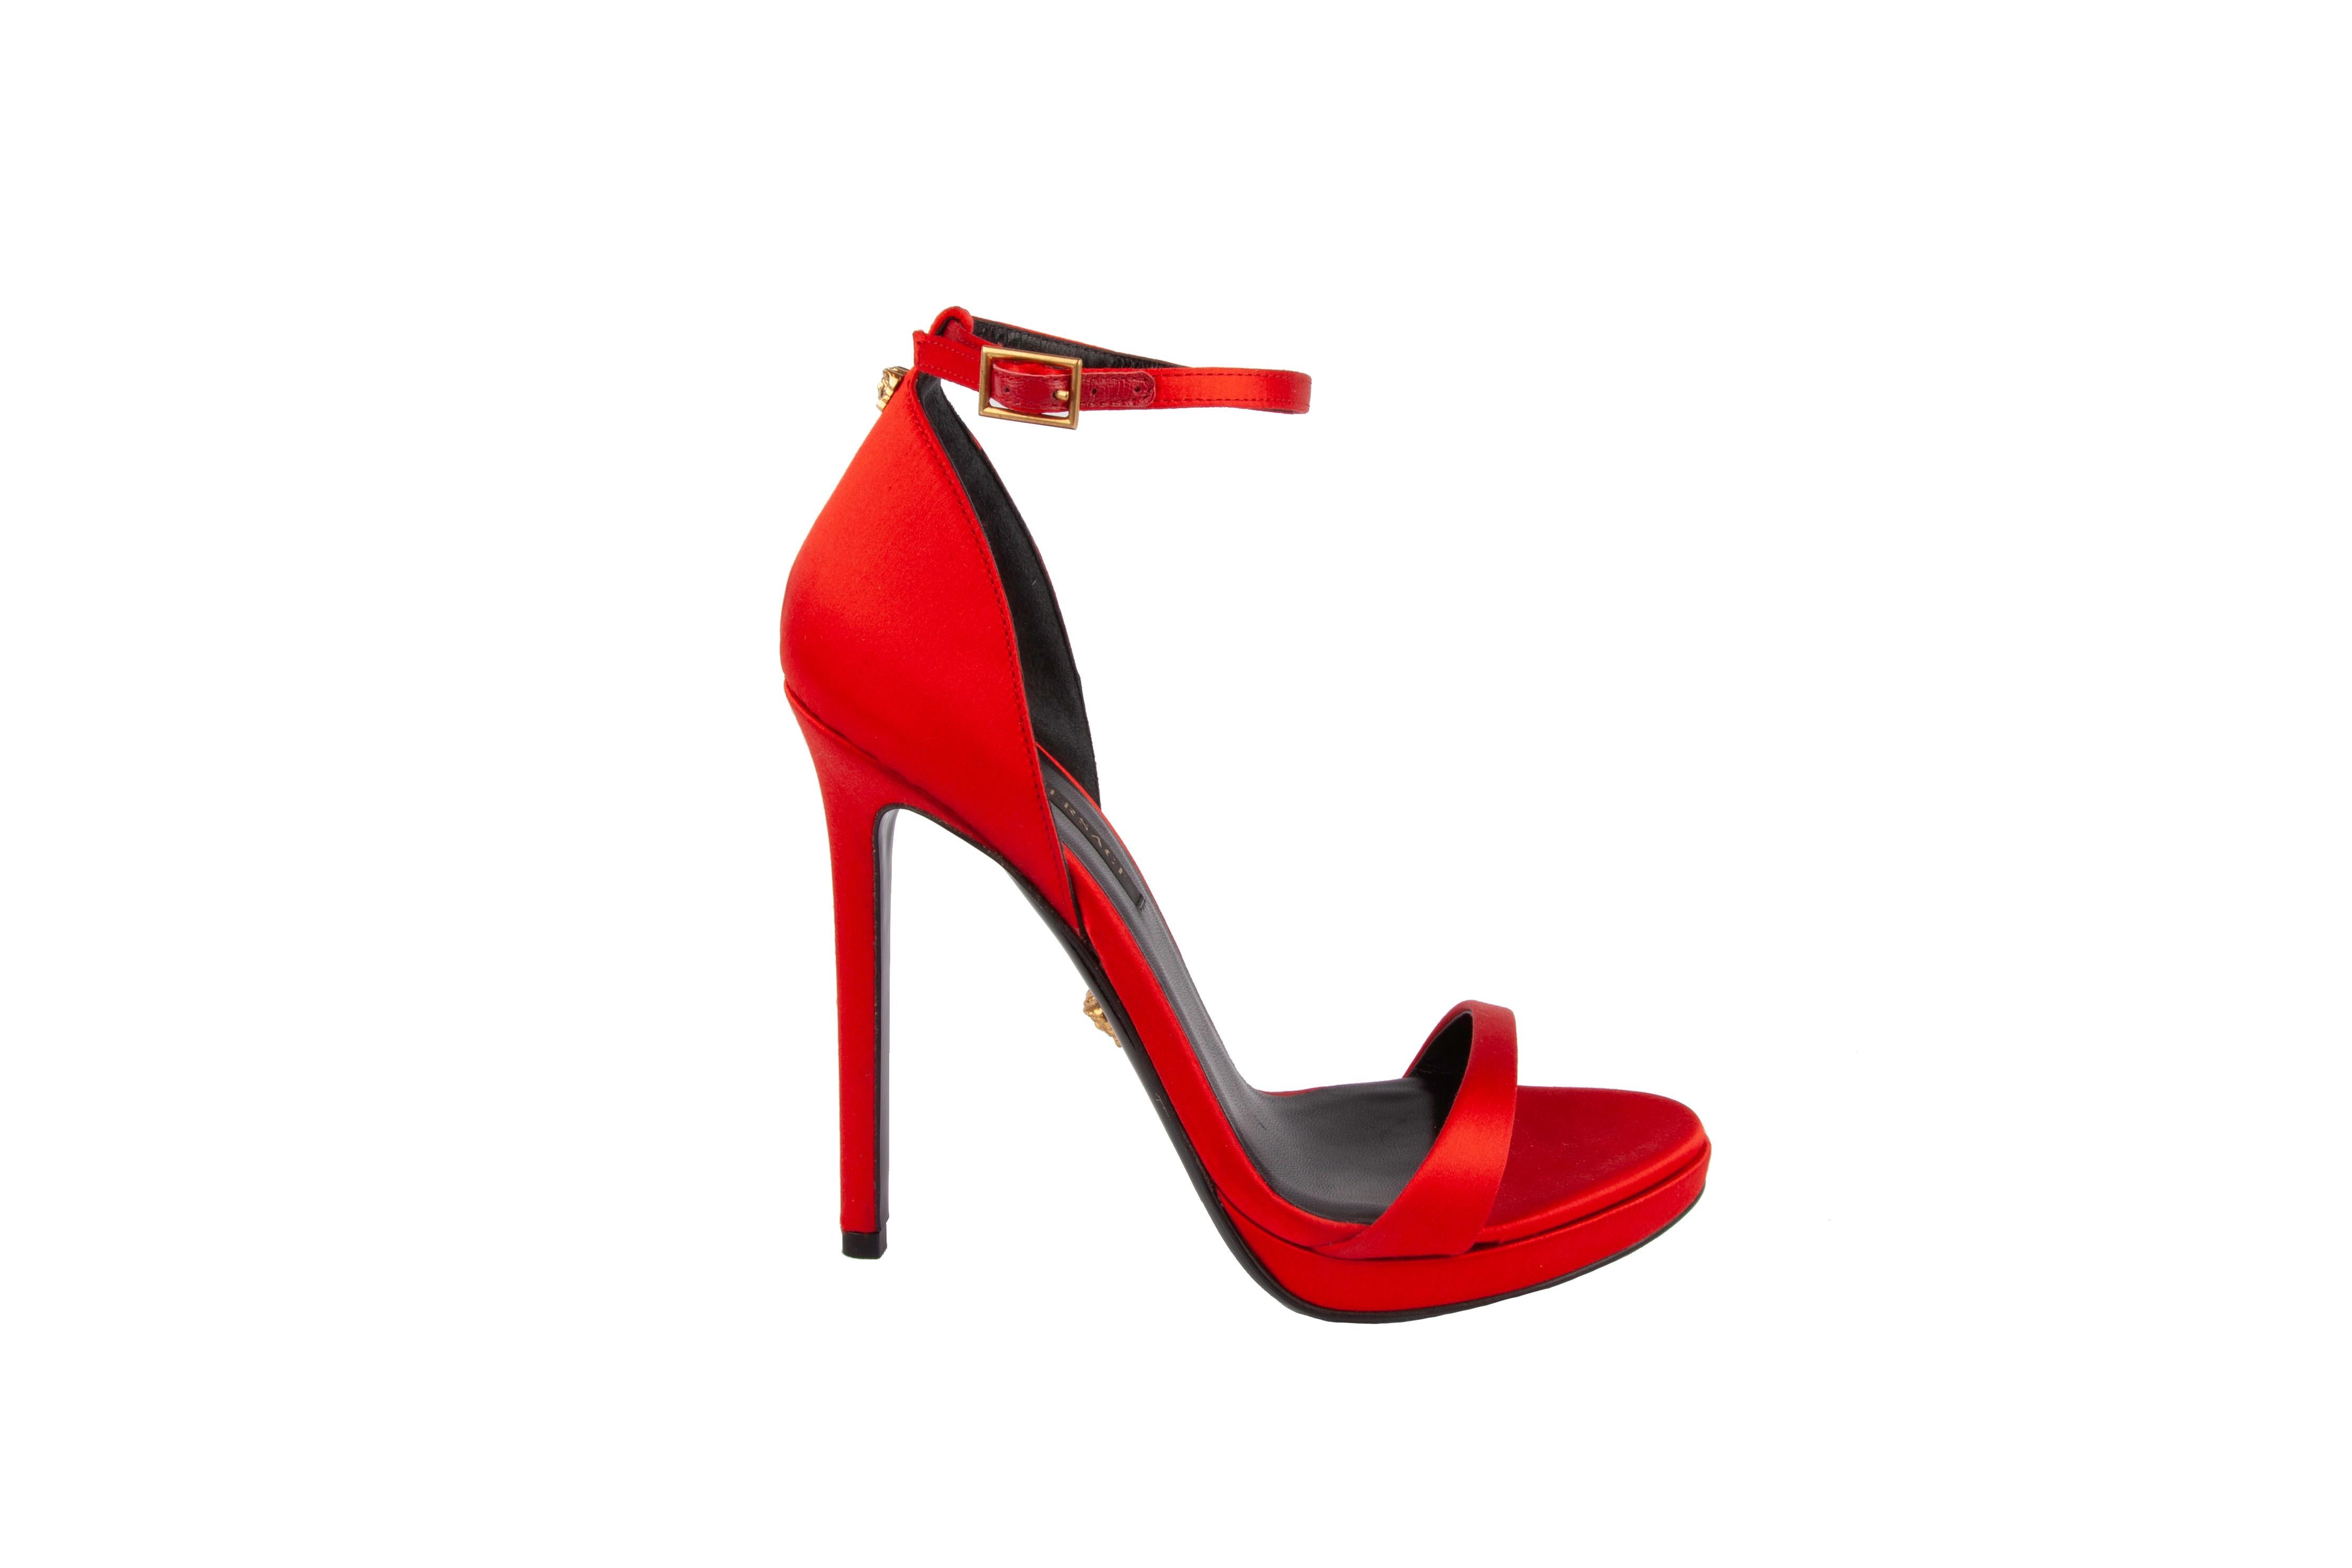 These Versace heels feature a luxurious red satin material, delicate straps, and gold tone hardware. They are a timeless, classic item that your closet needs. Brand new. Made in Italy.

Size: 41 (IT)

Material: Satin & Leather